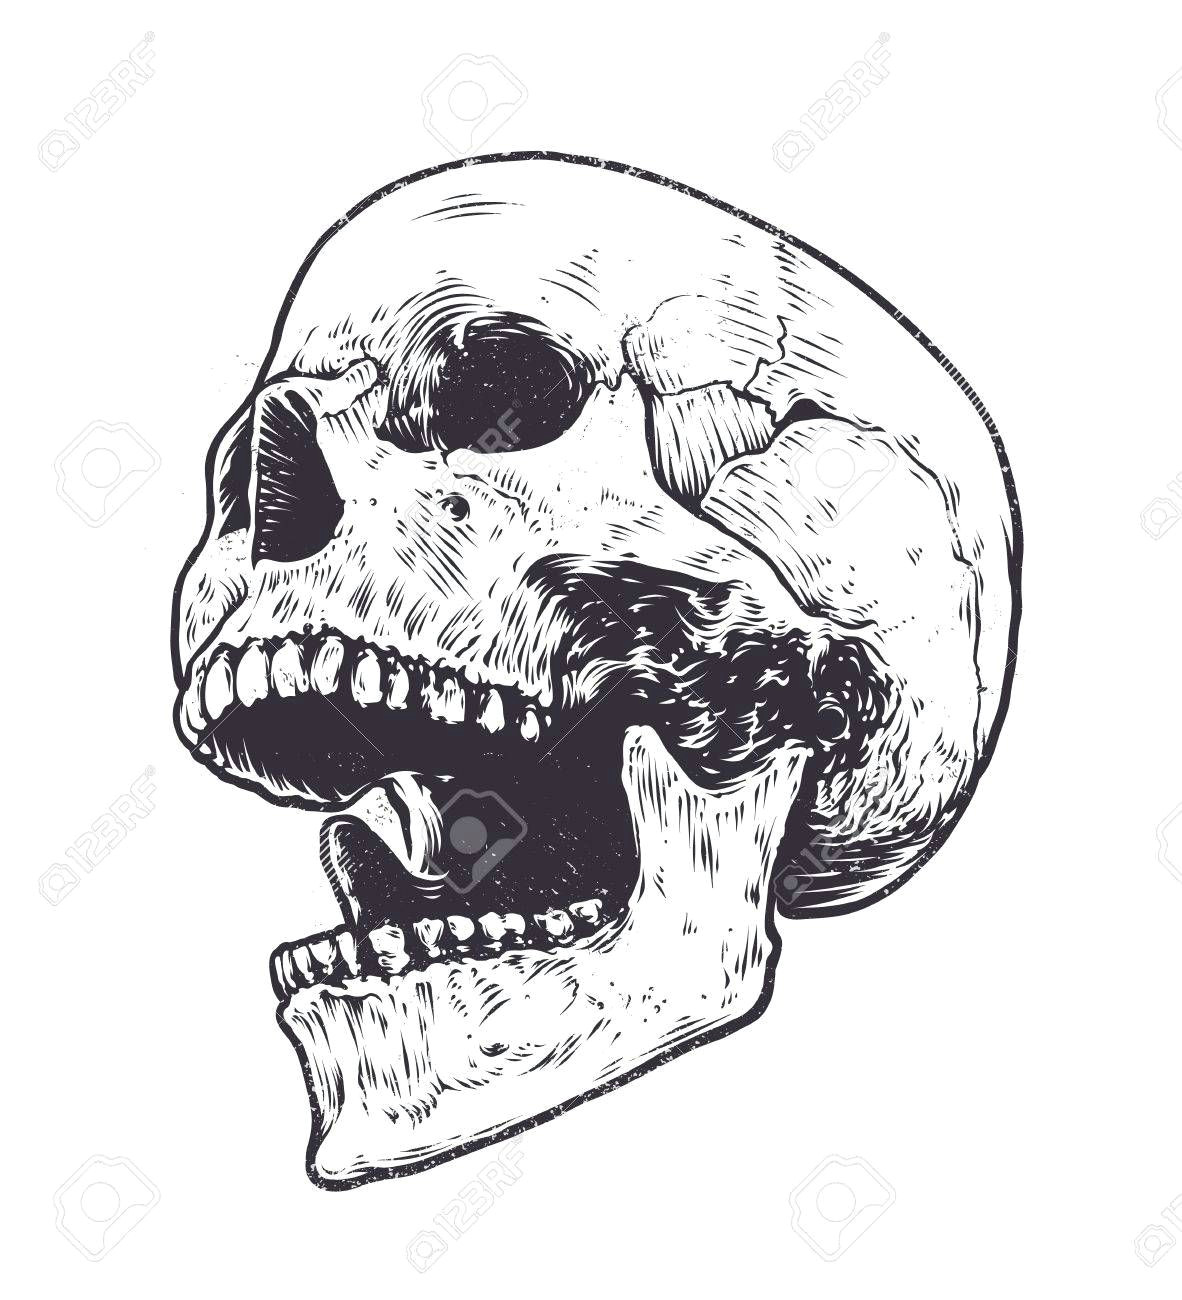 Skull Drawing Mouth Open Image Result for Skull Open Mouth Drawing Tattoo Projects